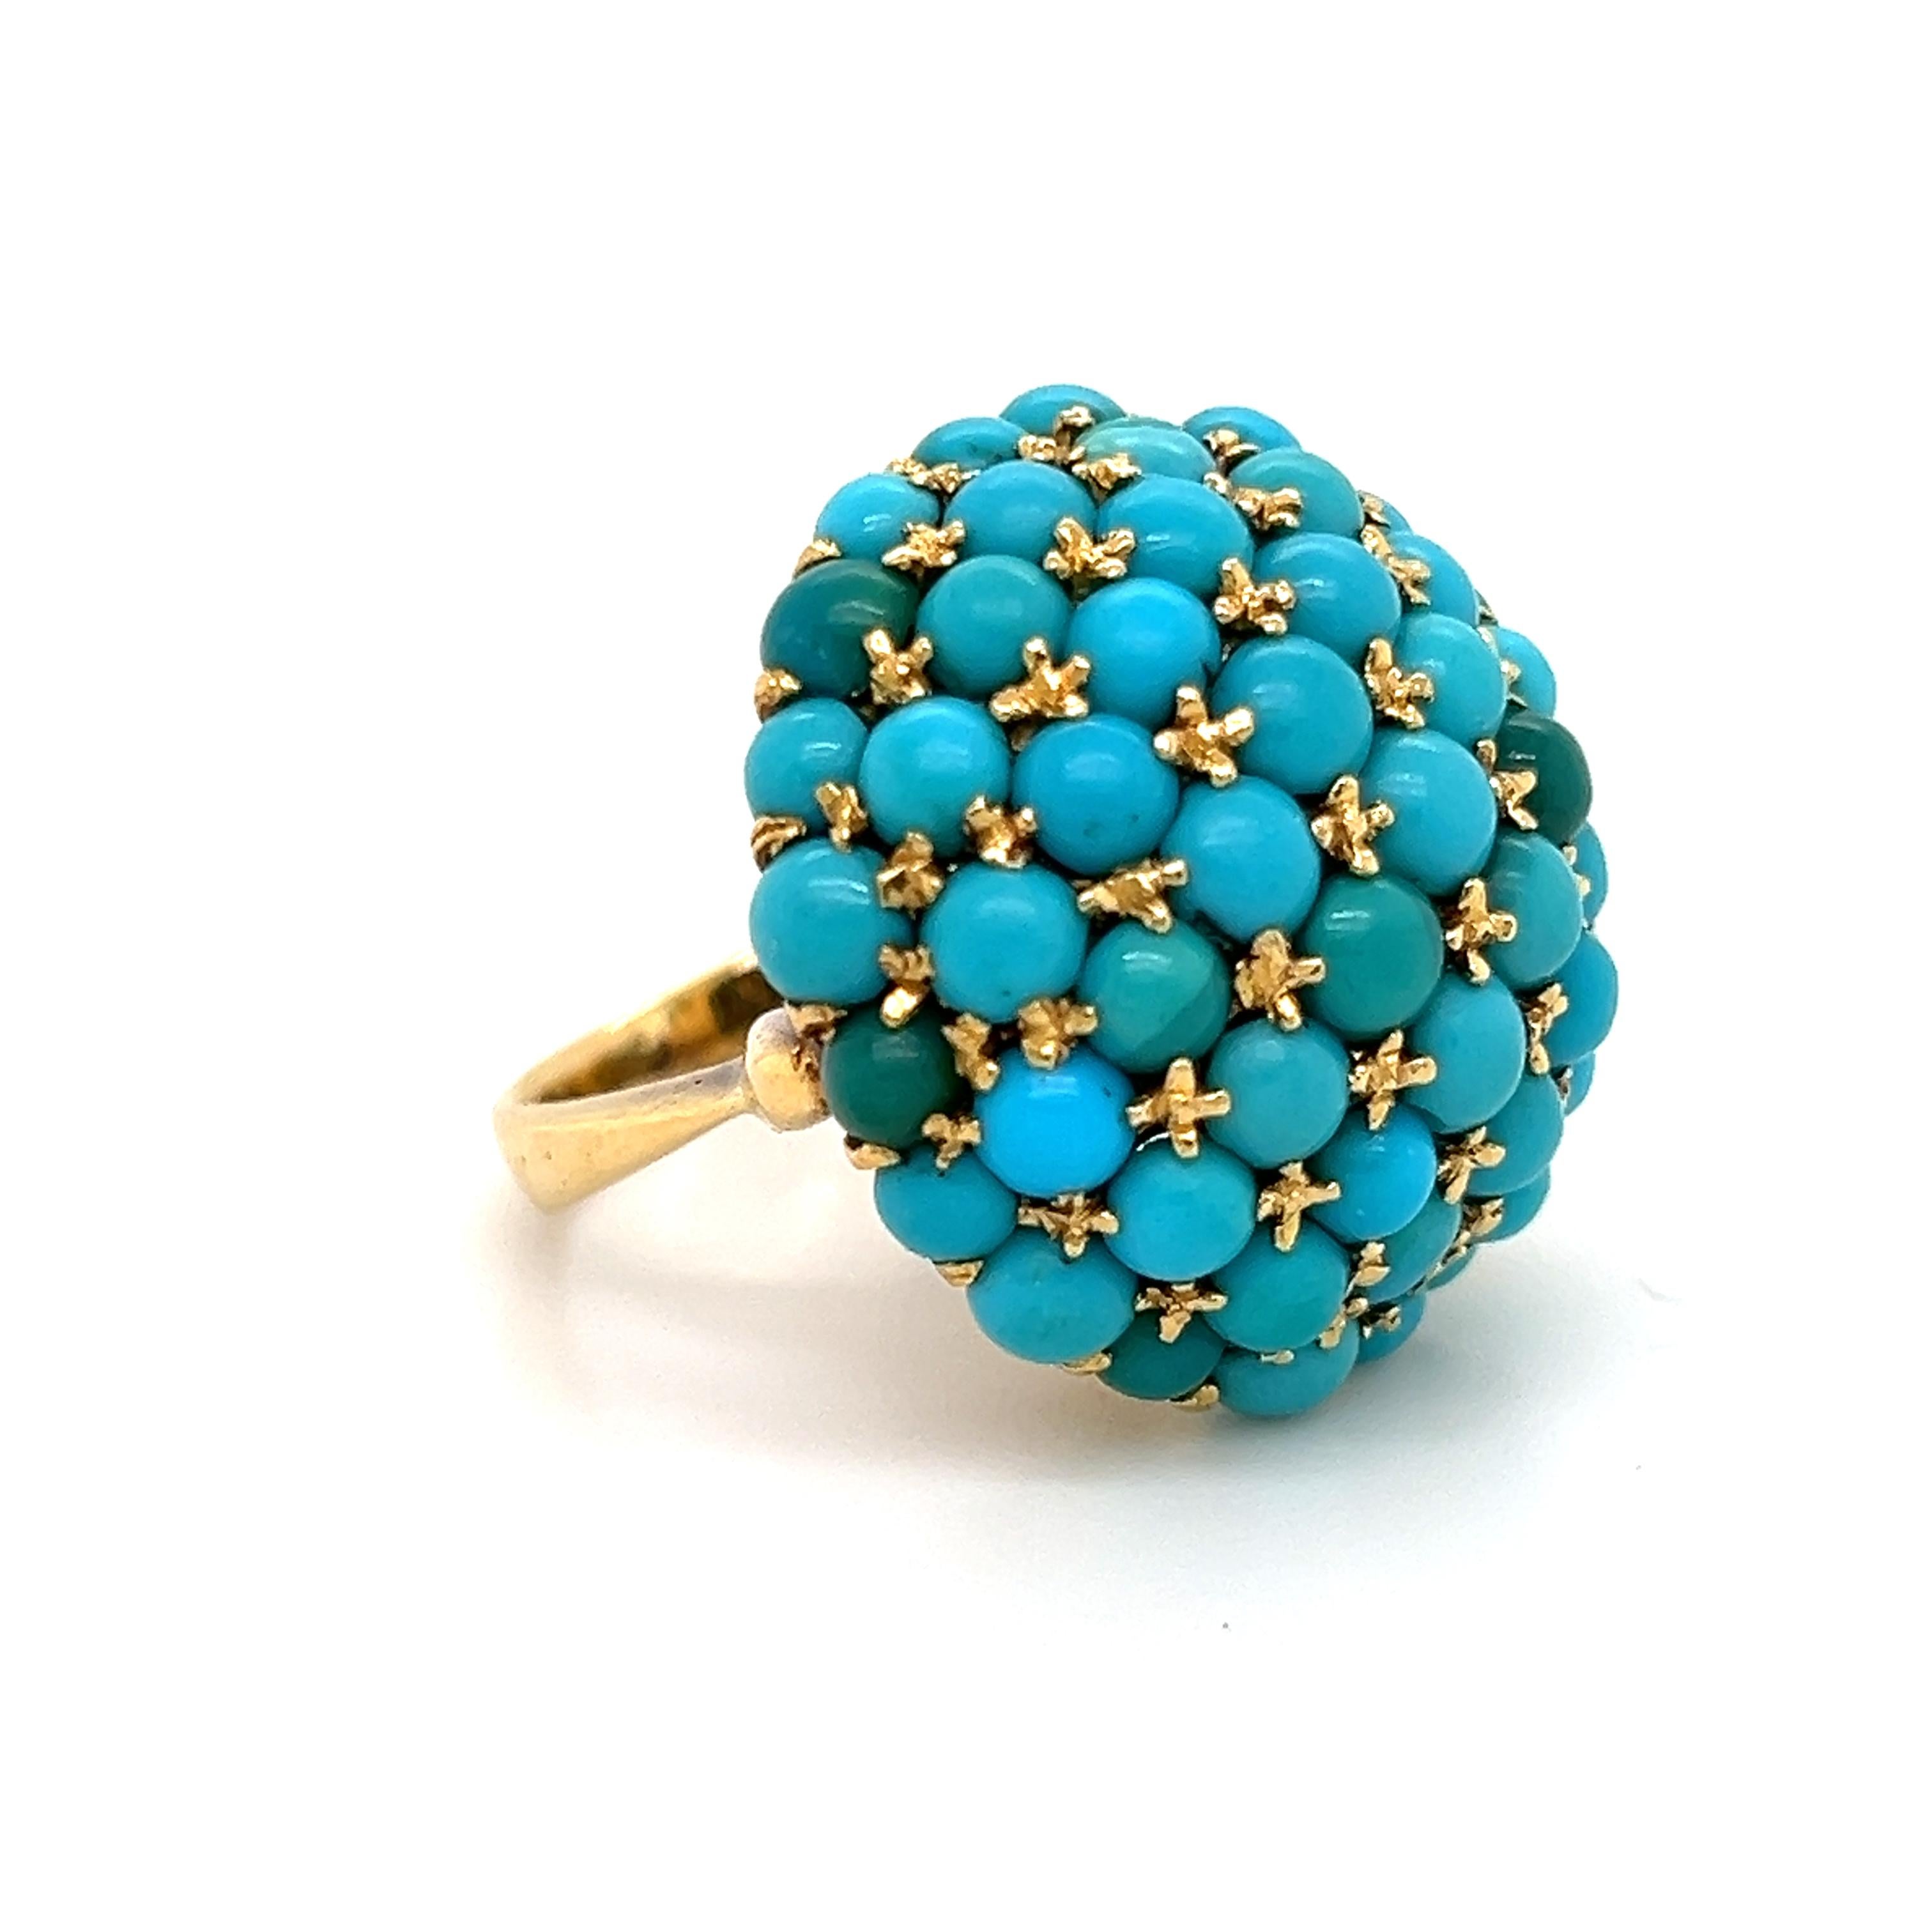 Amazing design crafted in 18k yellow gold. The ring highlights turquoise gemstones, cabochon cut and set in raised curved design also known as 